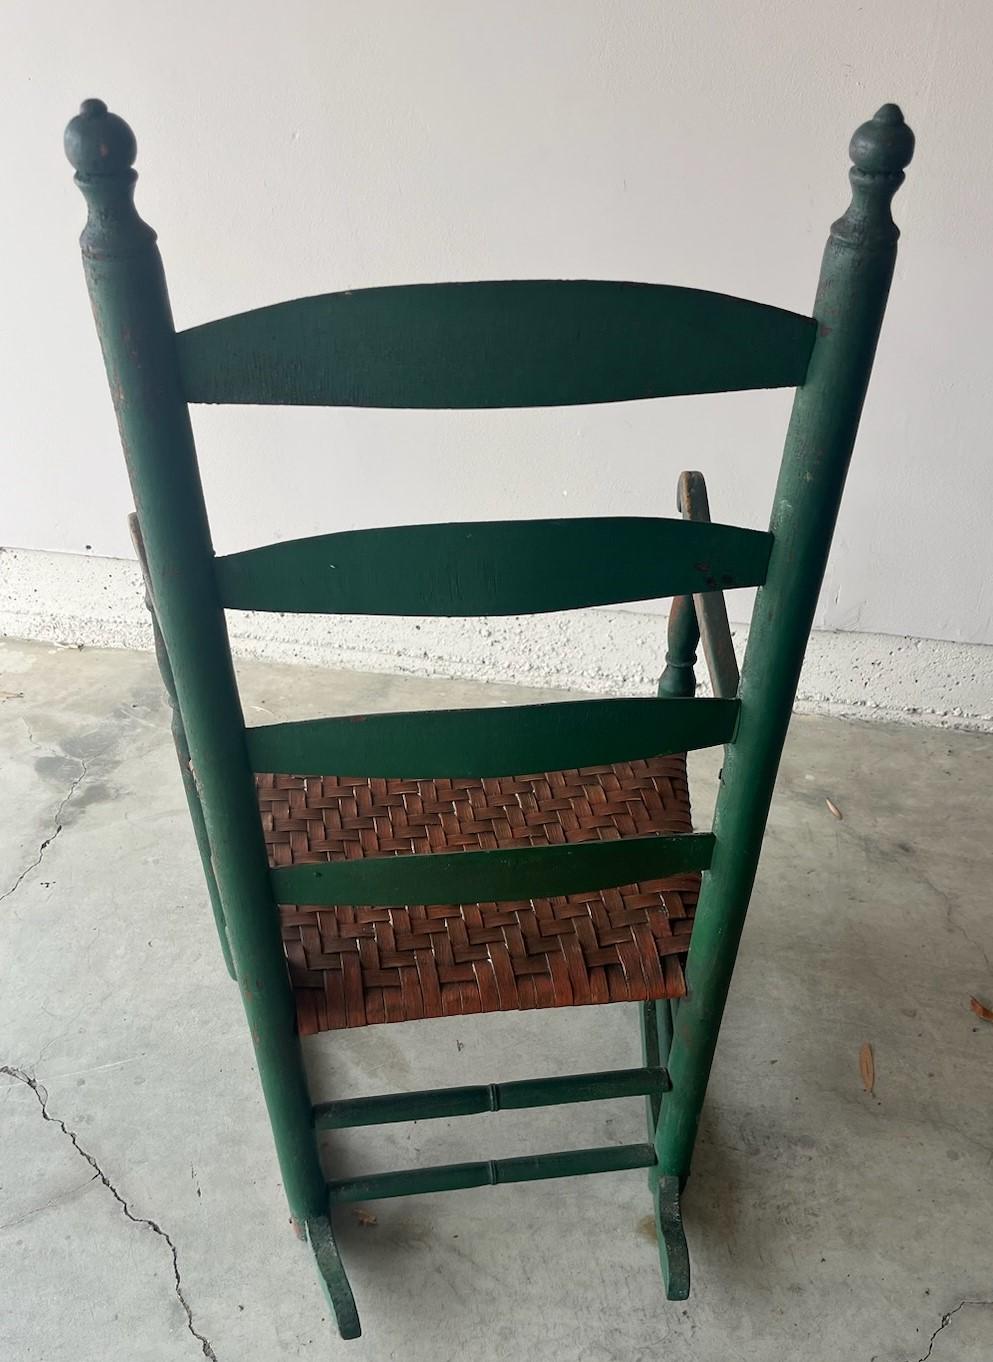 19Thc Original apple green ladder back rocking chair with a hand woven rush seat in a salmon paint. This early New England rocking chair is in amazing condition and very sturdy.
The painted surface is all original and undisturbed.